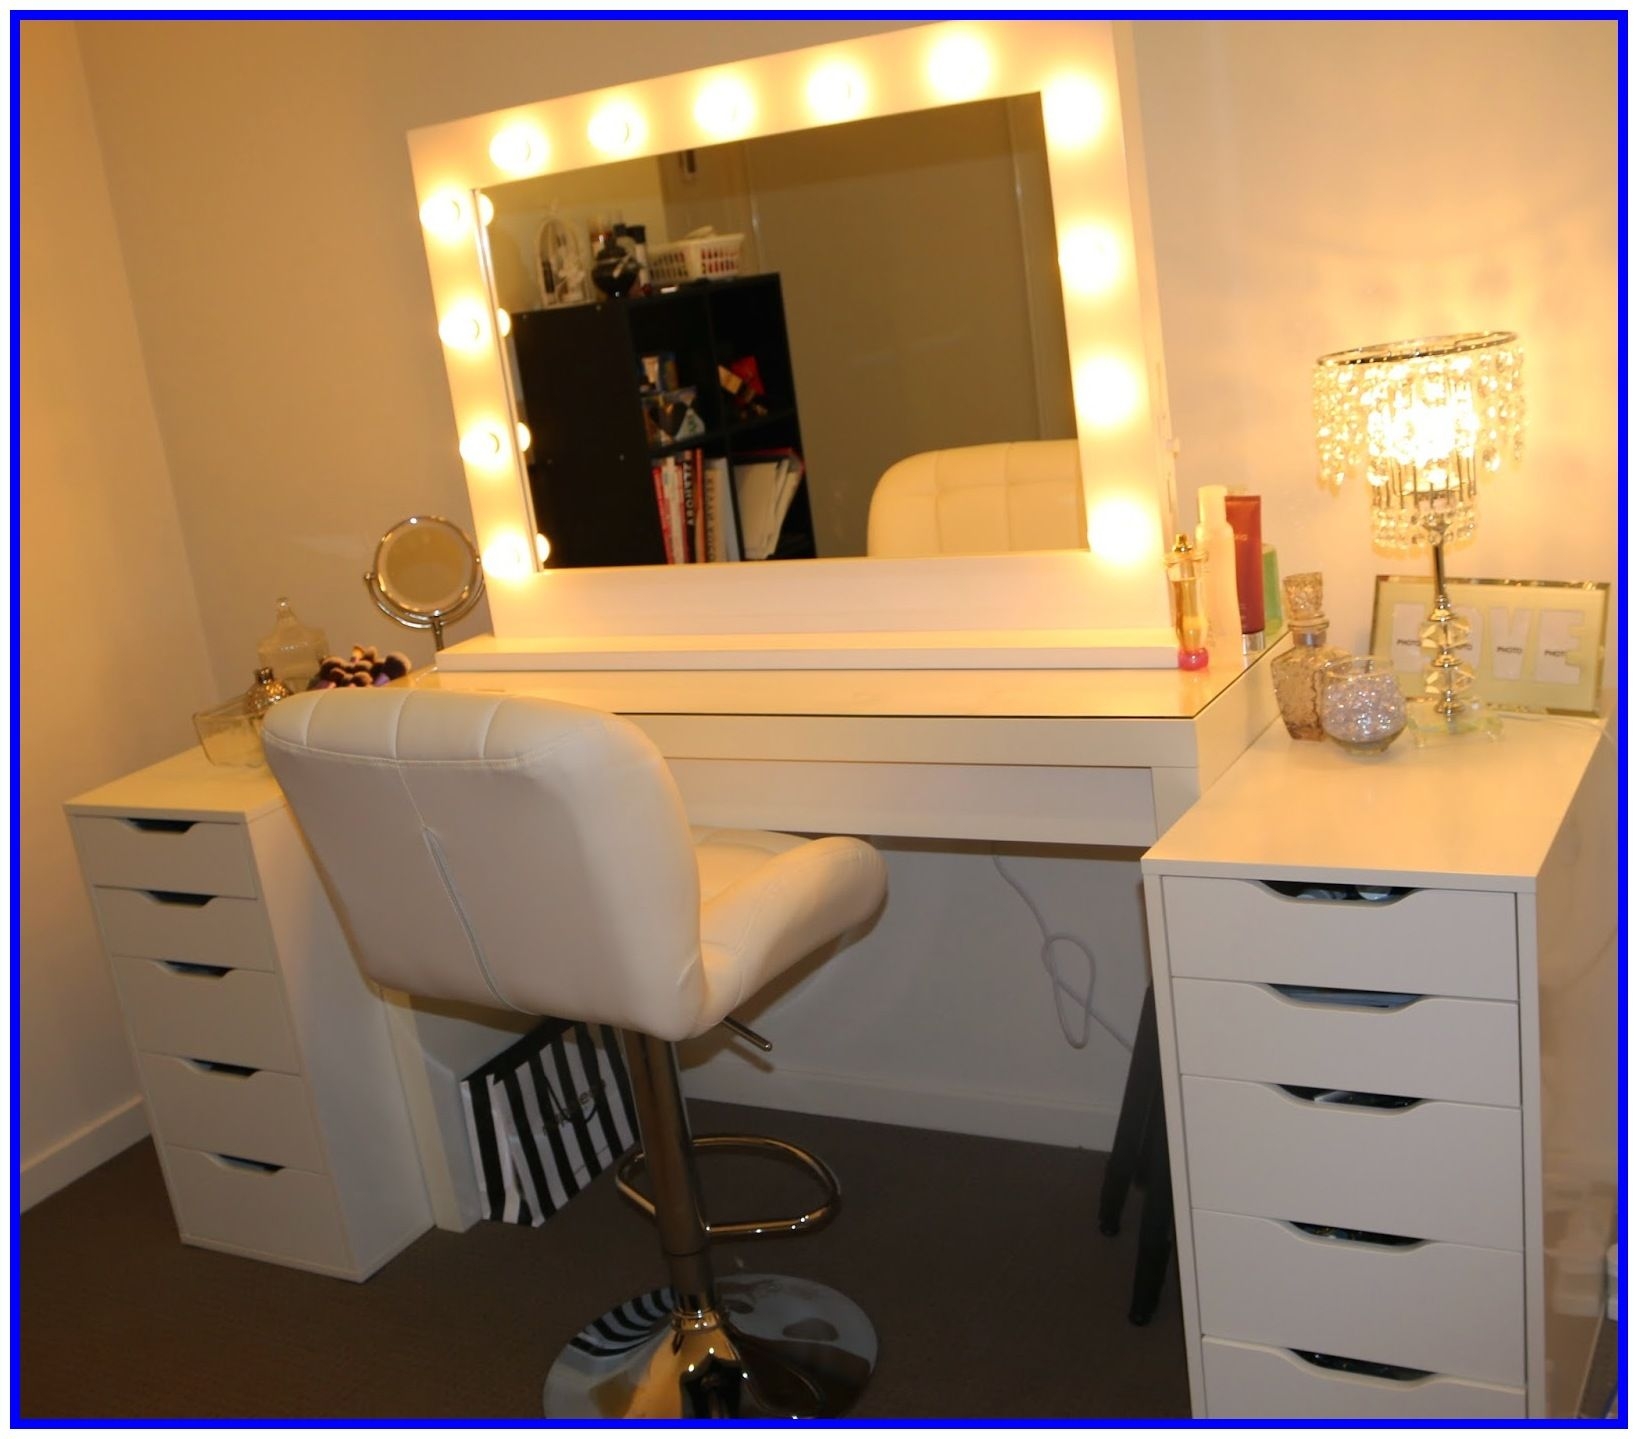 Makeup Vanity Table With Lighted Mirror, Makeup Table With Mirror